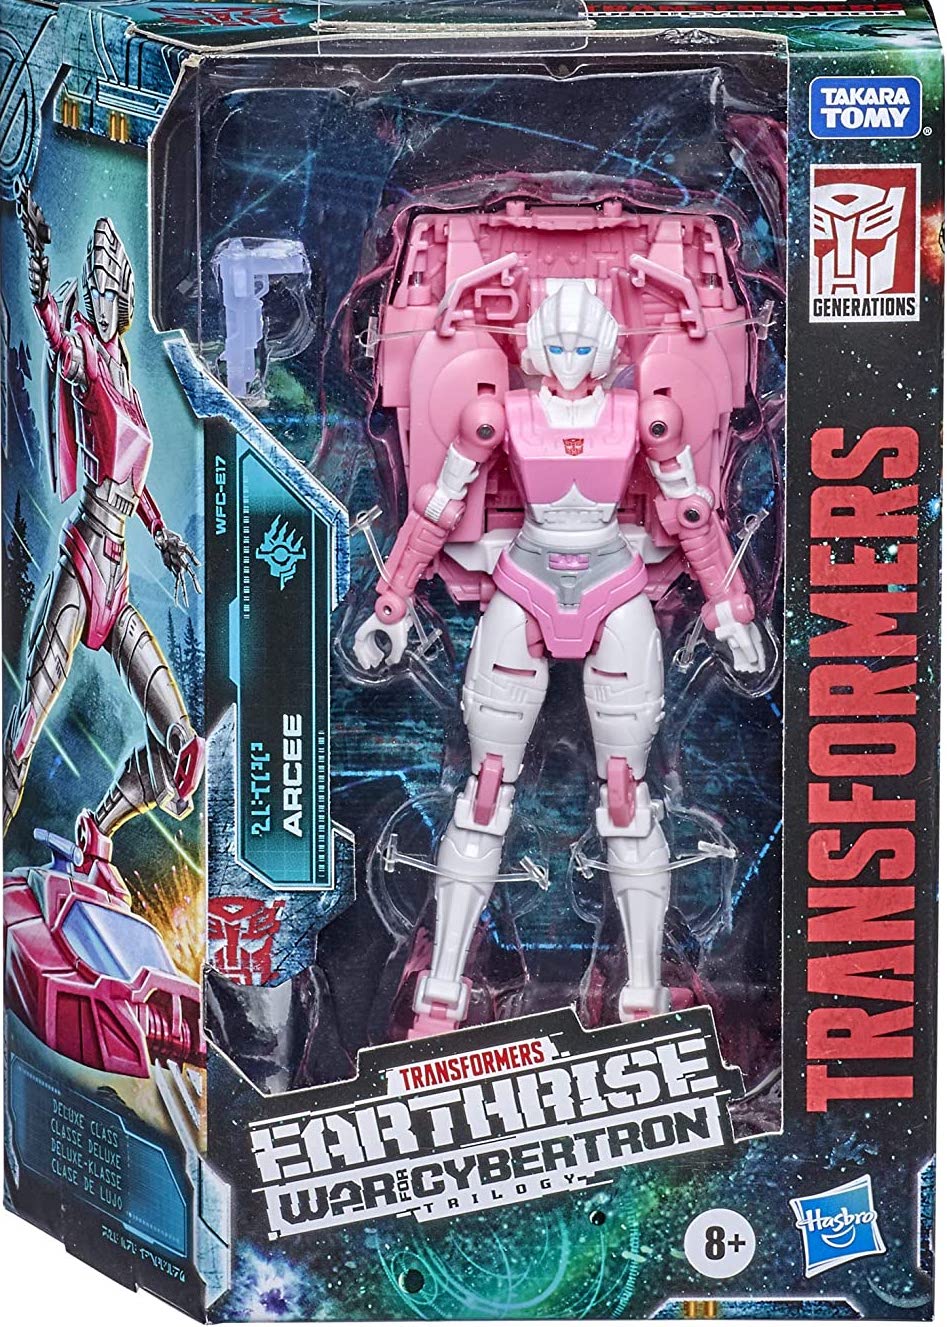 NIB - Transformers Prime ARCEE Deluxe Class First Edition